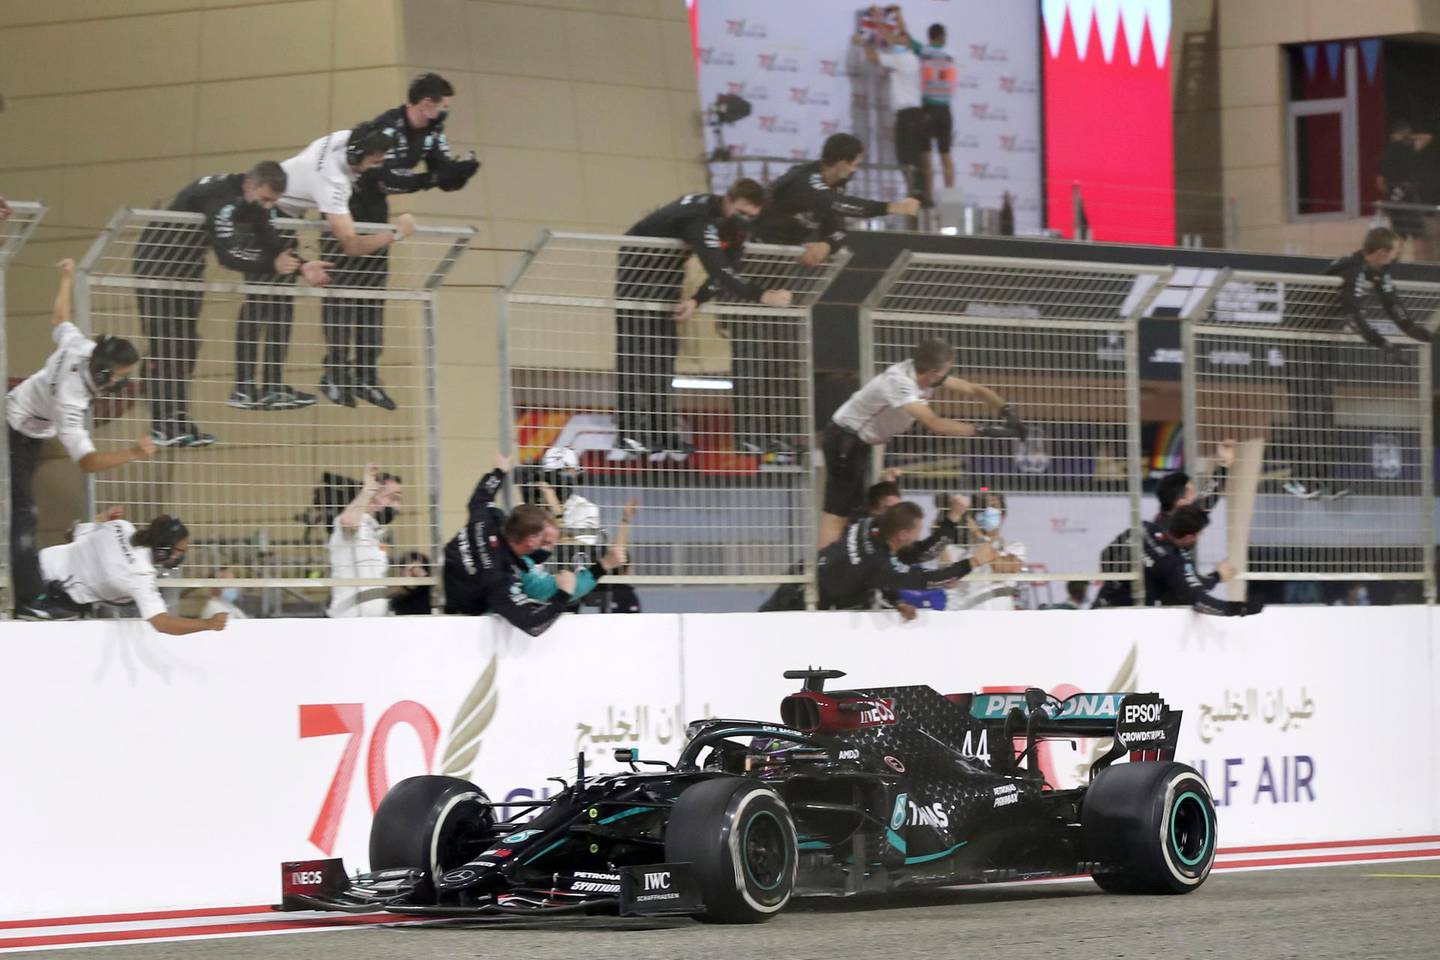 FILE - In this Sunday, Nov. 29, 2020 file photo Mercedes driver Lewis Hamilton of Britain is congratulated by his pit crew after wining the Formula One race in Bahrain International Circuit in Sakhir, Bahrain. World champion Lewis Hamilton tested positive for COVID-19 and will miss the Sakhir Grand Prix this weekend, his Mercedes-AMG Petronas F1 Team said Tuesday Dec. 1, 2020. (Tolga Bozoglu, Pool via AP, File)